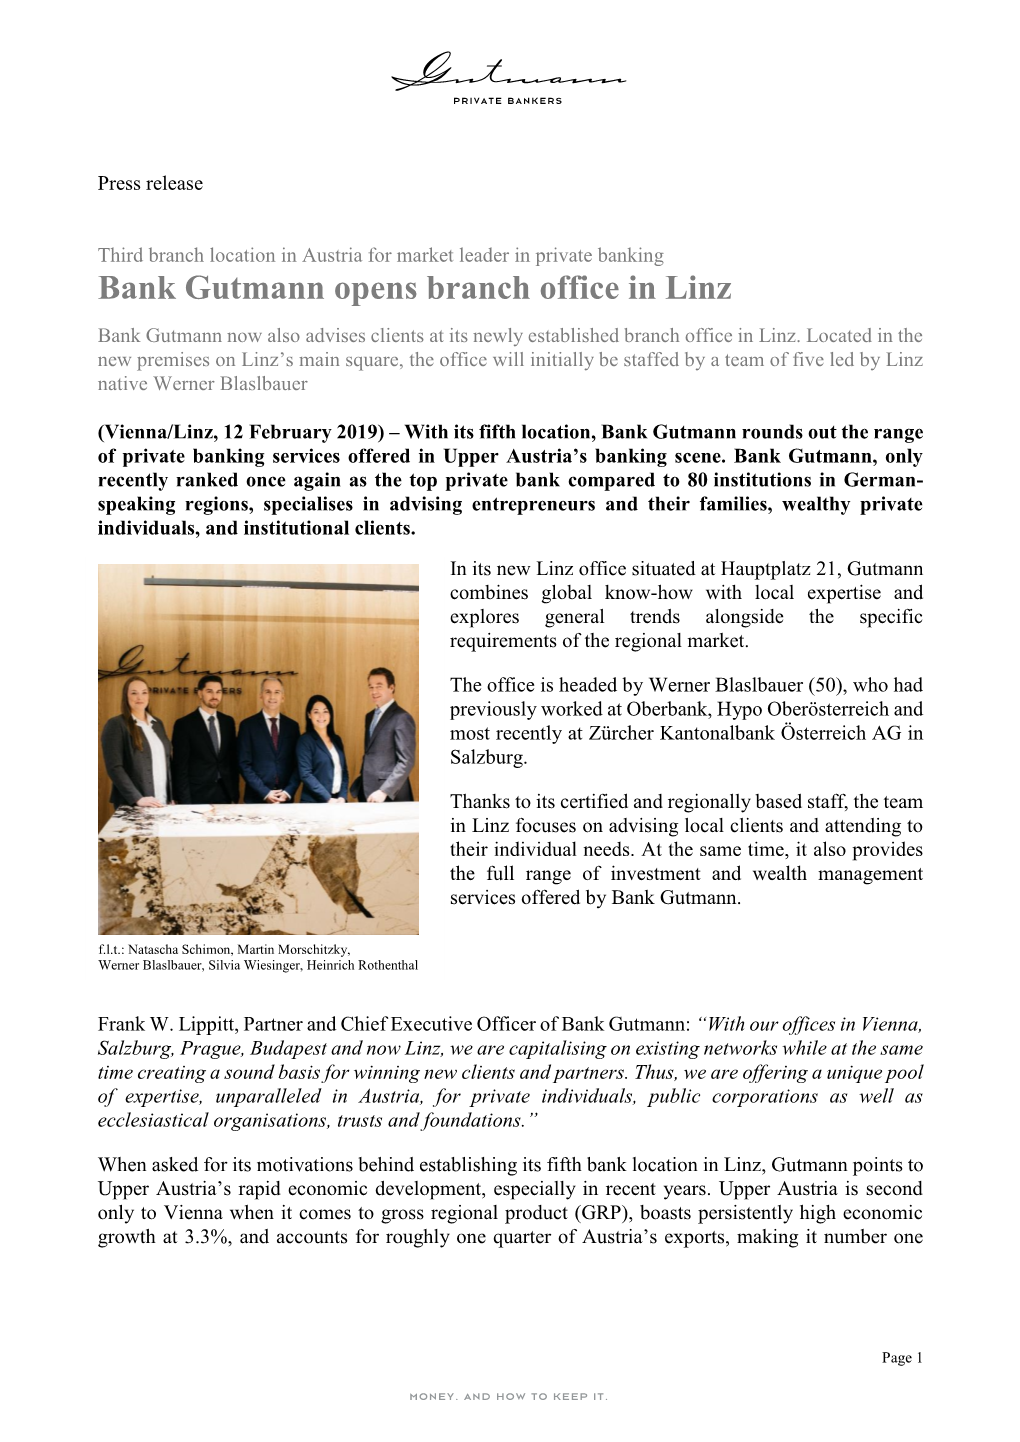 Bank Gutmann Opens Branch Office in Linz Bank Gutmann Now Also Advises Clients at Its Newly Established Branch Office in Linz